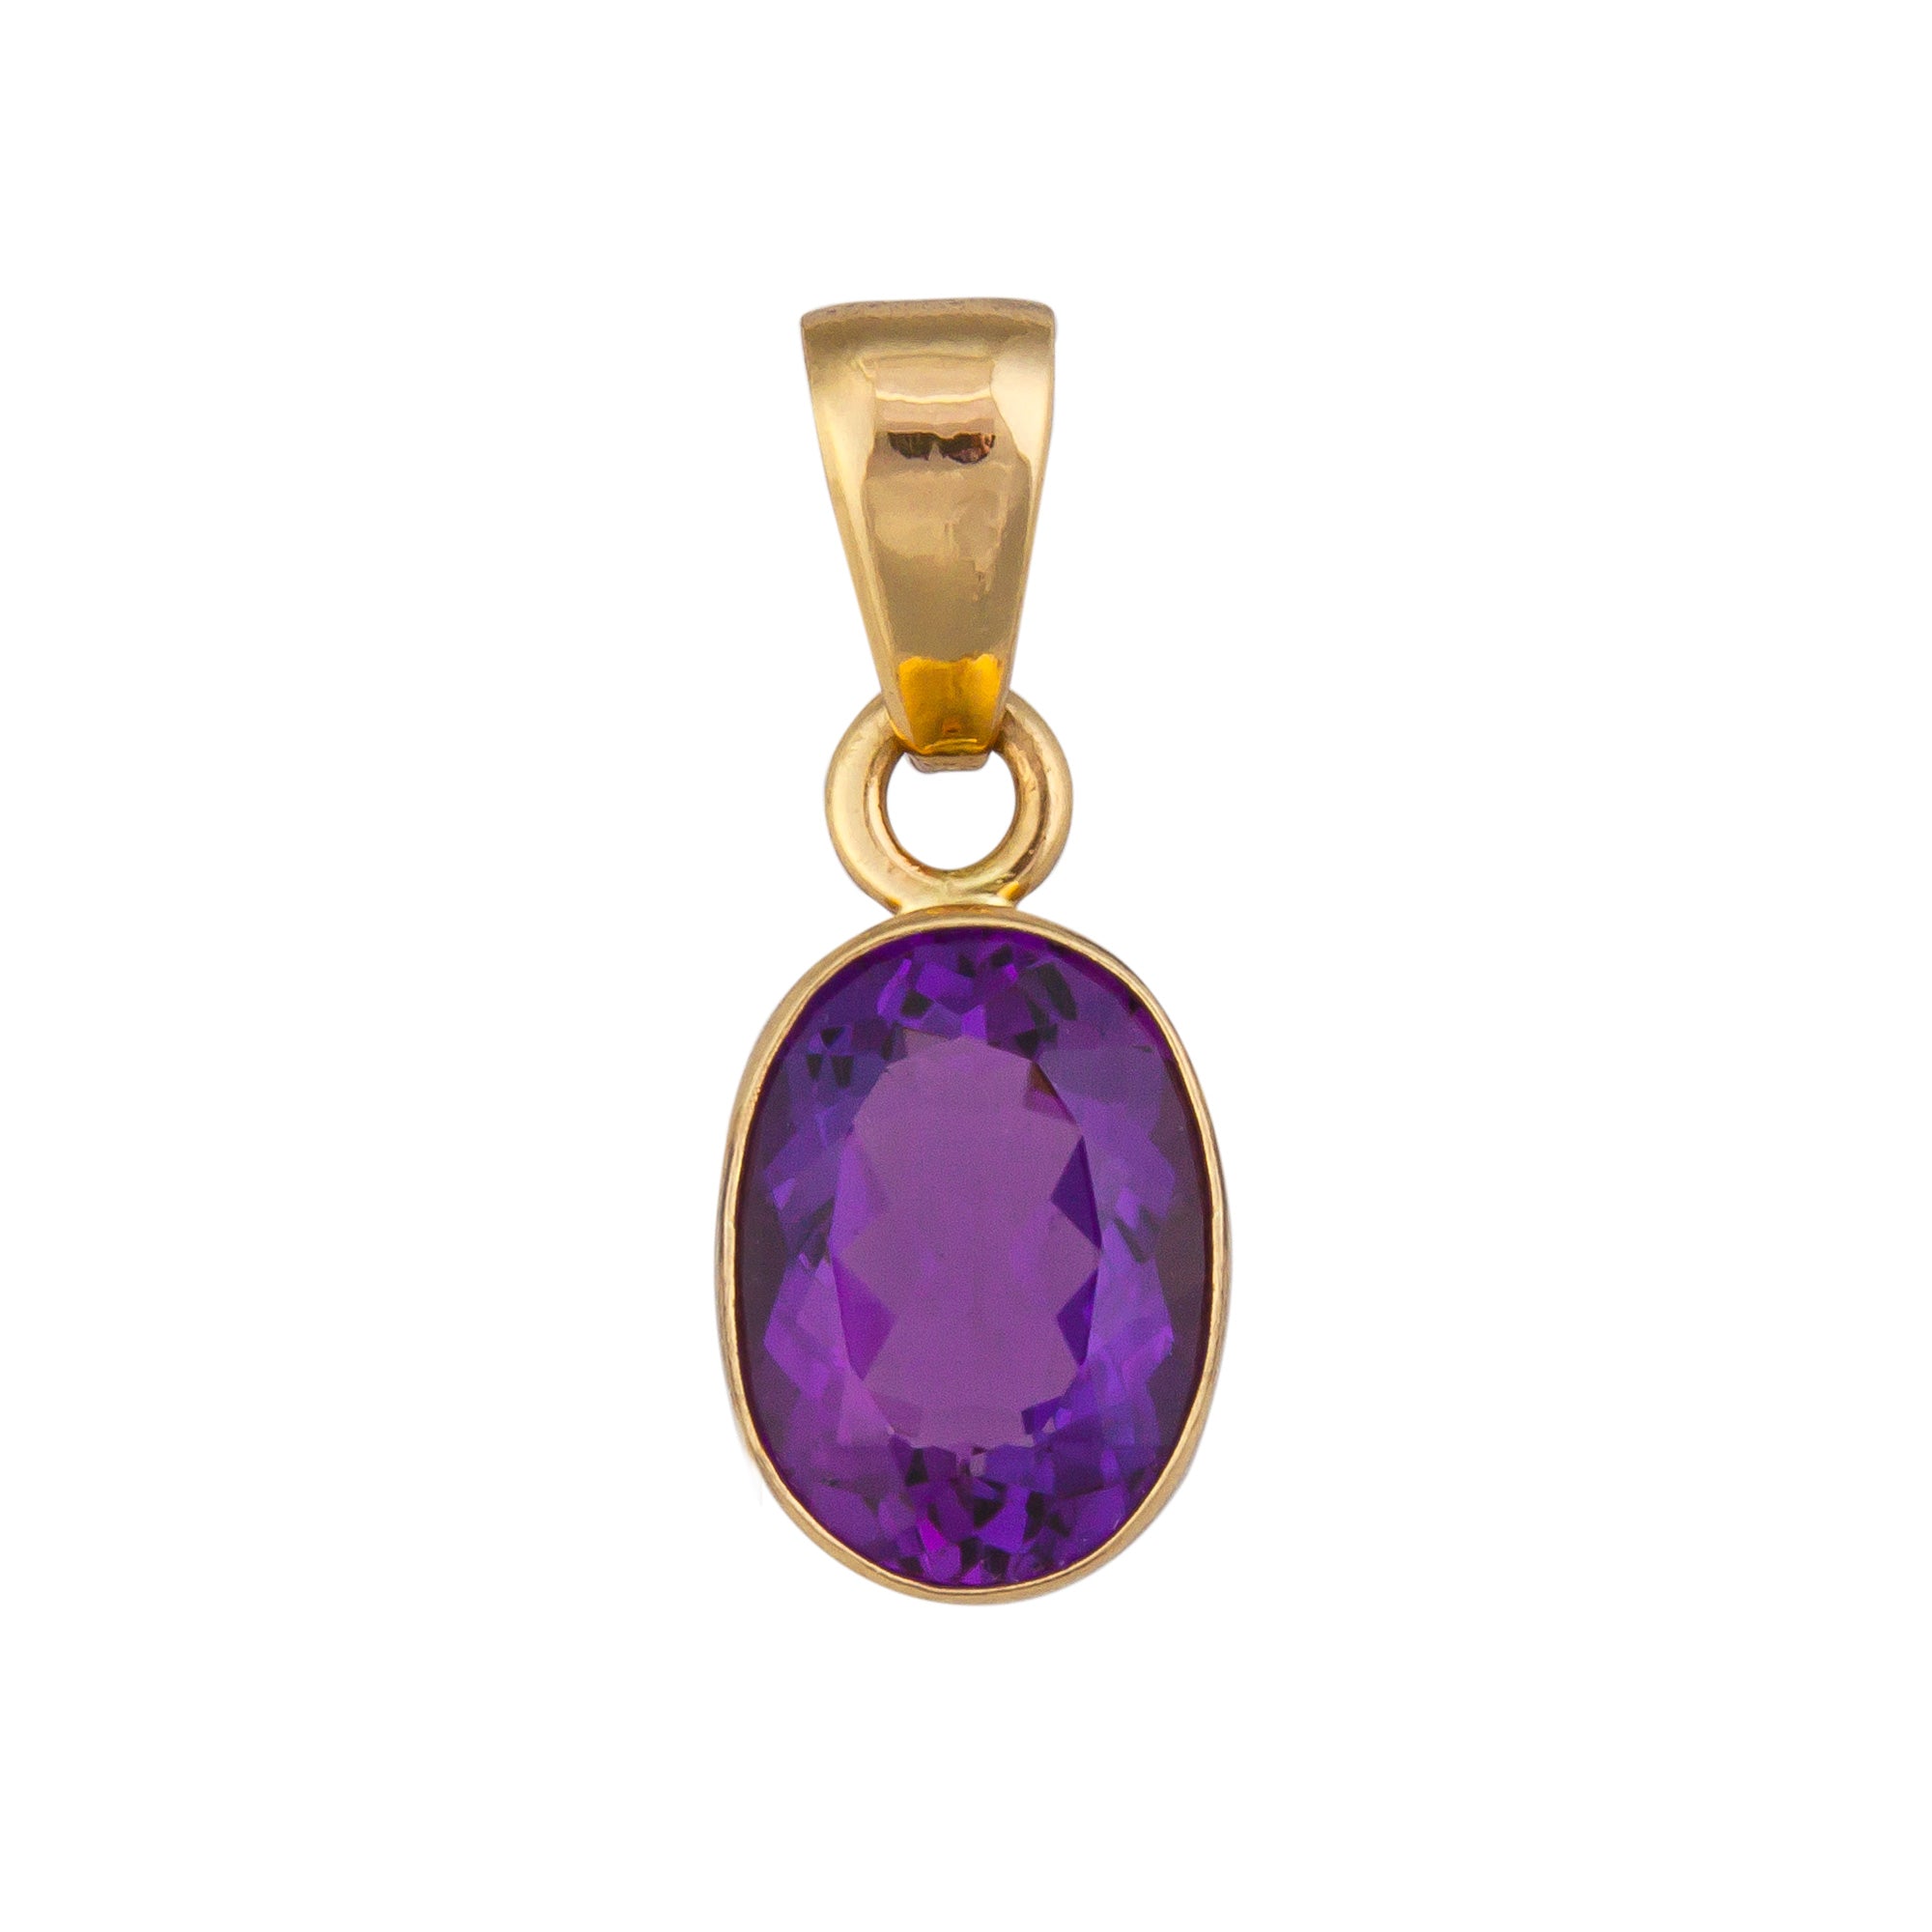 Charles Albert Jewelry - Alchemia Amethyst Oval Pendant - Front View